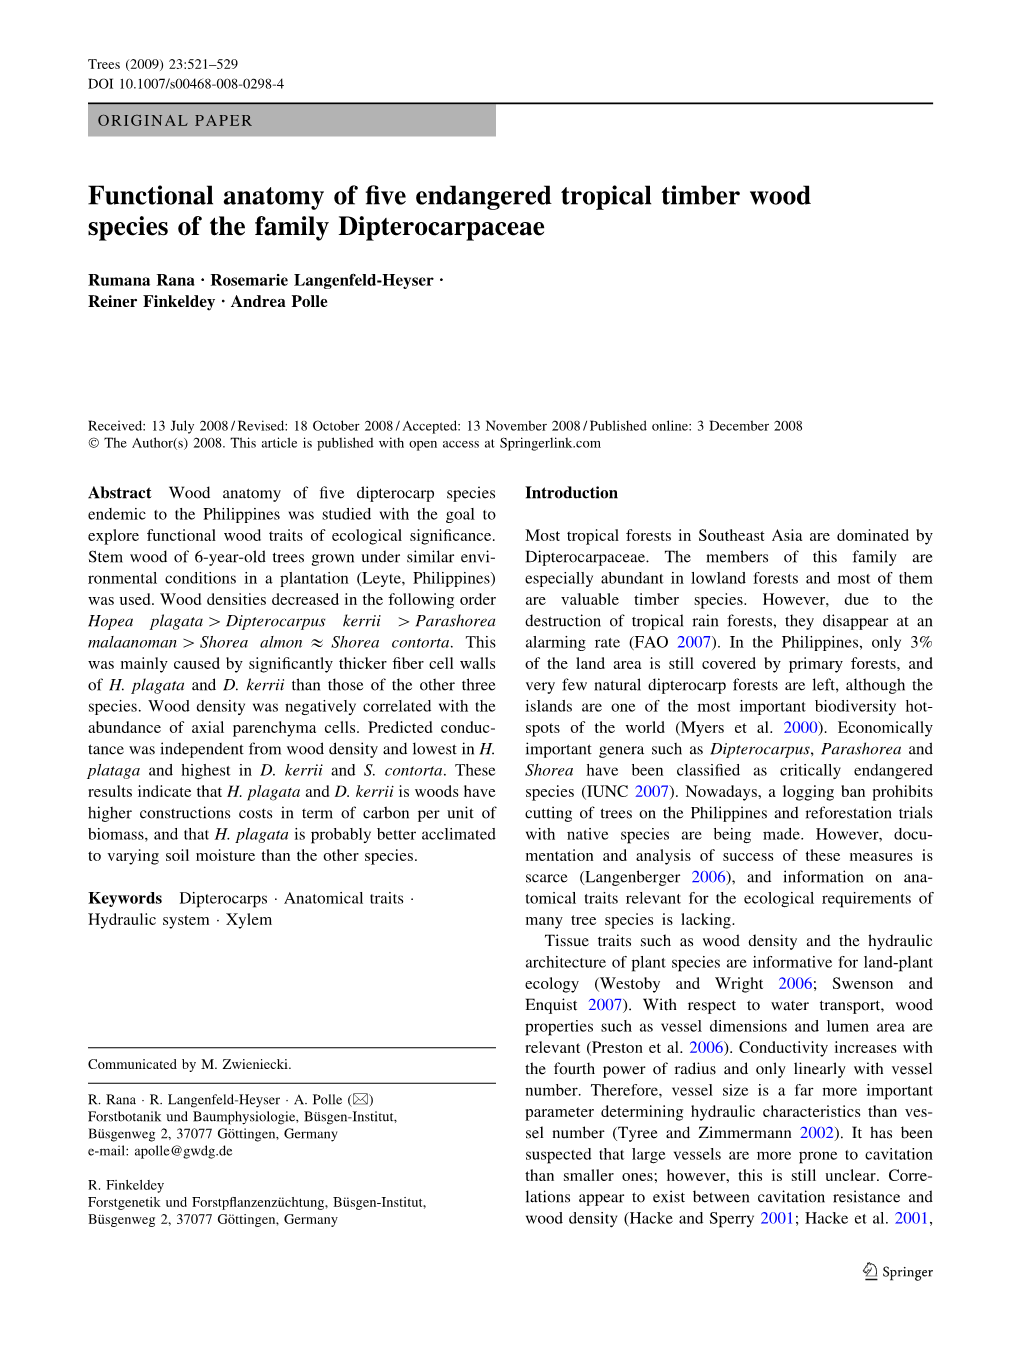 Functional Anatomy of Five Endangered Tropical Timber